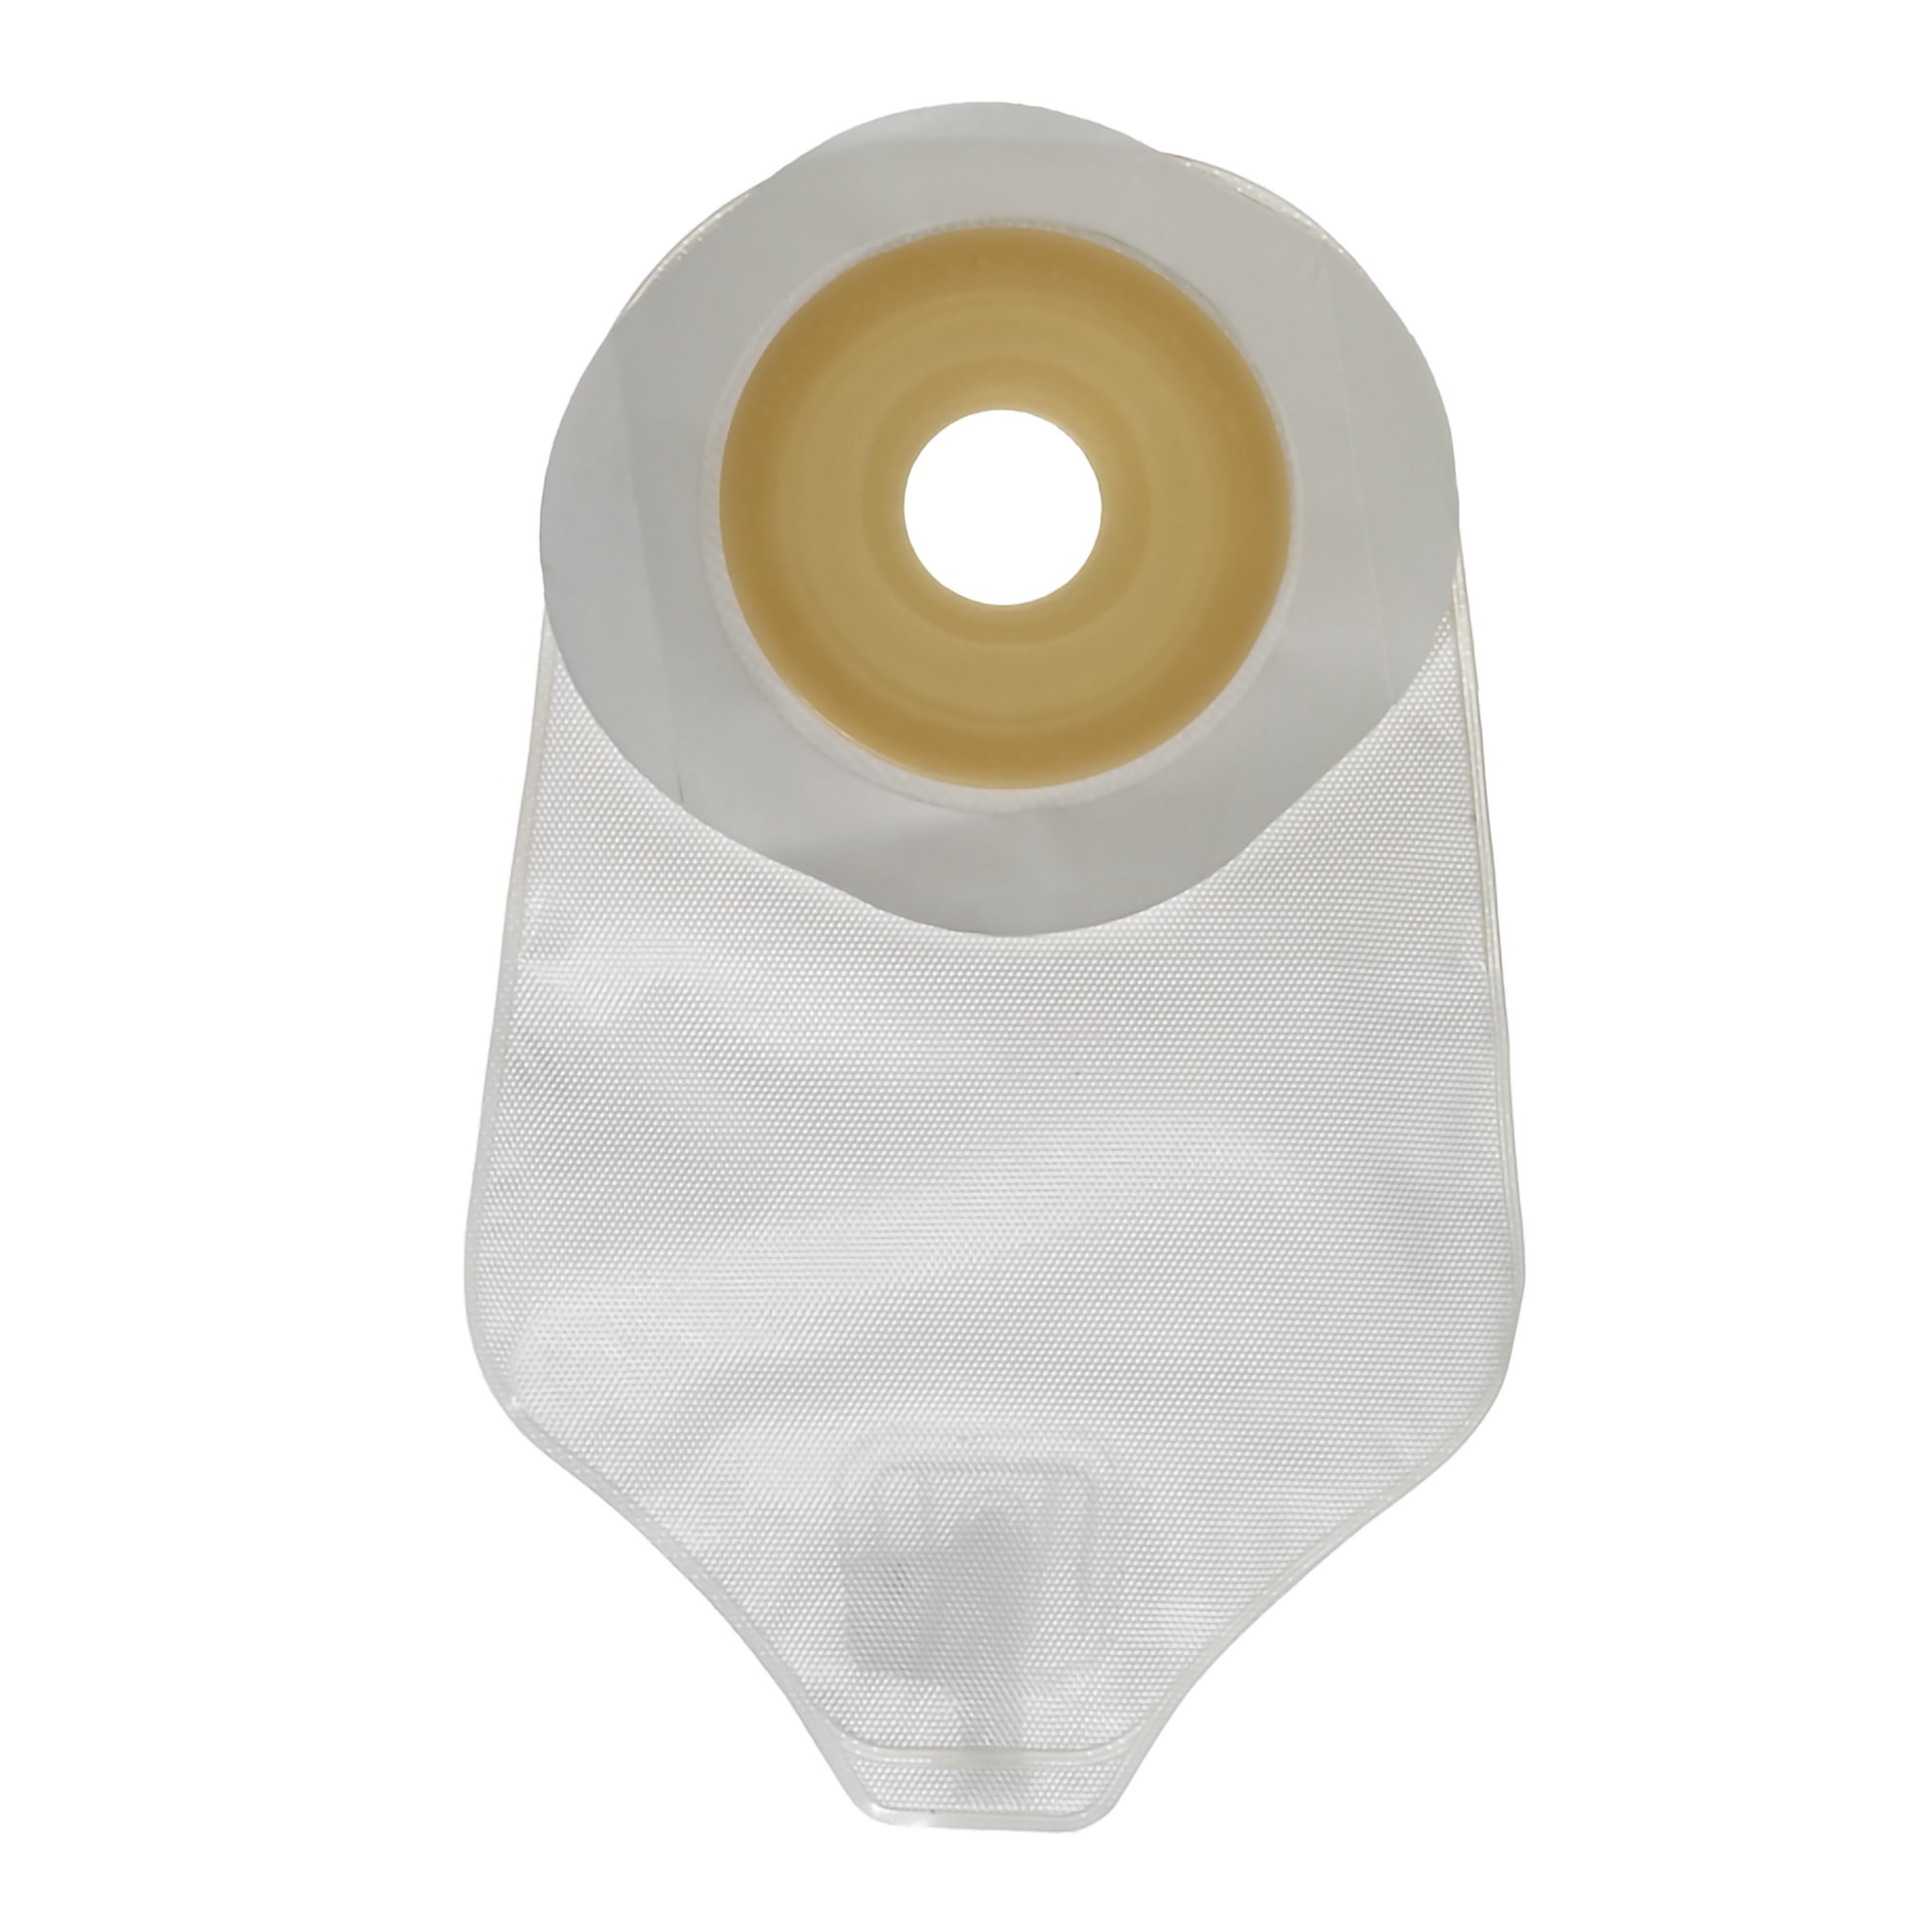 ActiveLife One-Piece Drainable Transparent Urostomy Pouch, 11 Inch Length, 1 Inch Stoma MK 305687